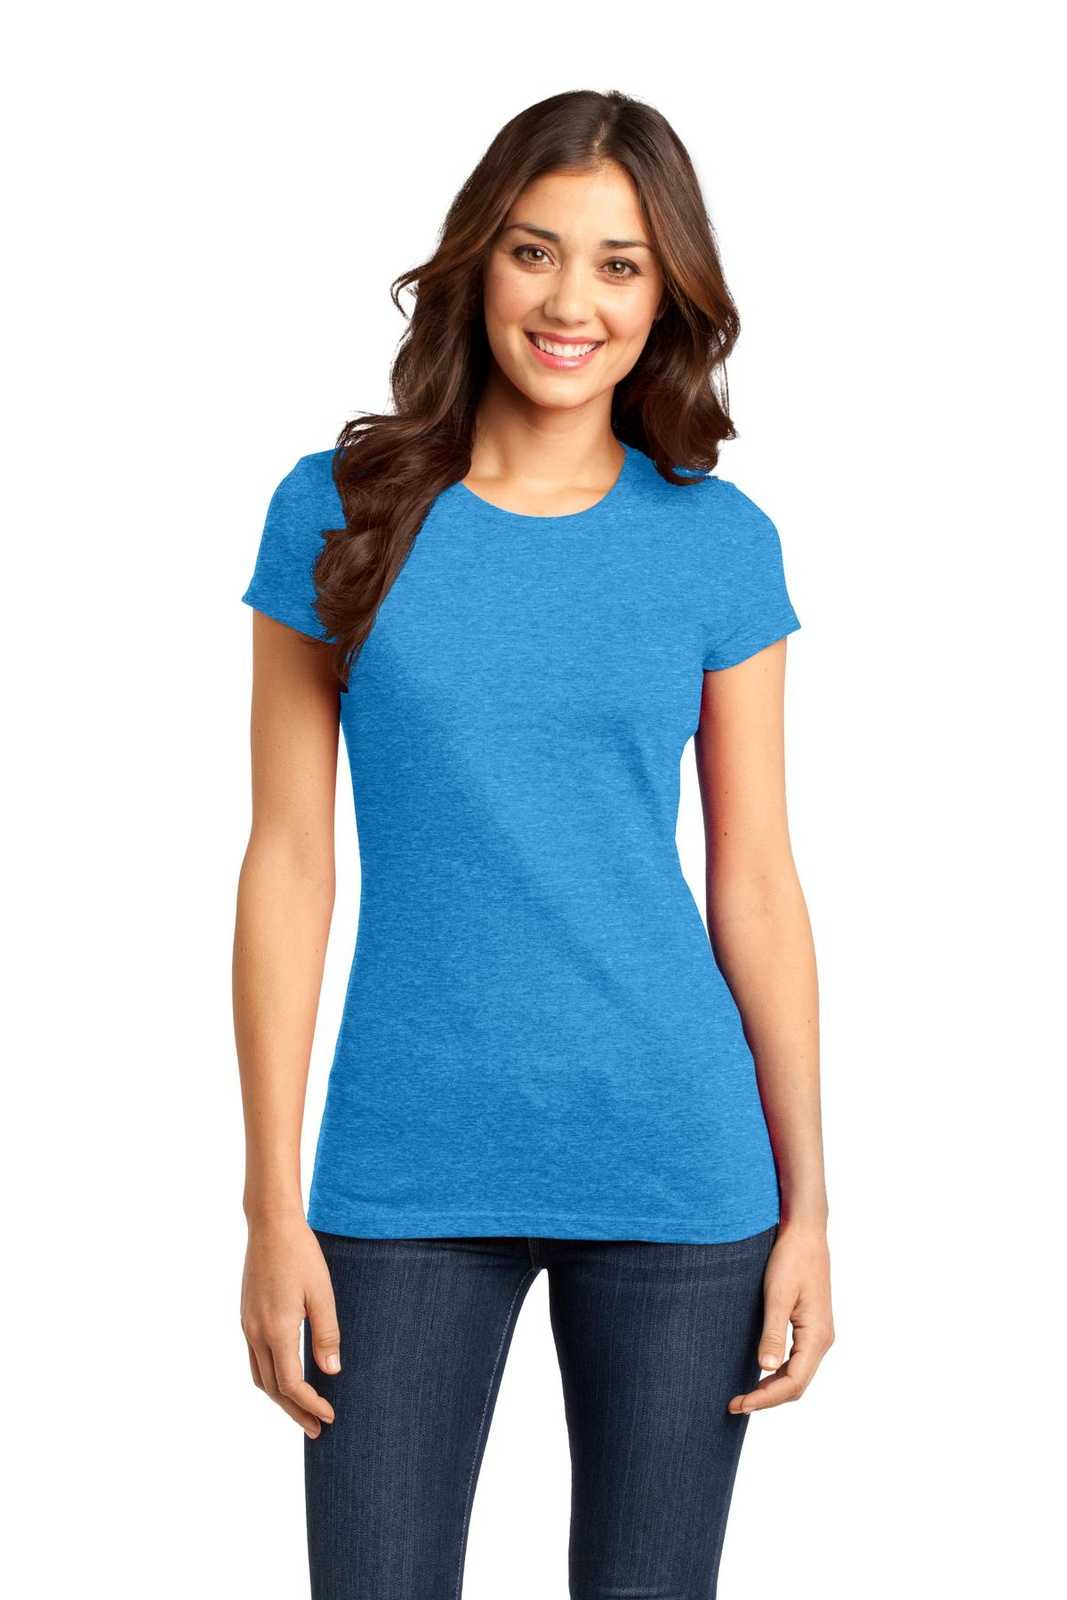 District DT6001 Women's Fitted Very Important Tee - Heathered Bright Turquoise - HIT a Double - 1